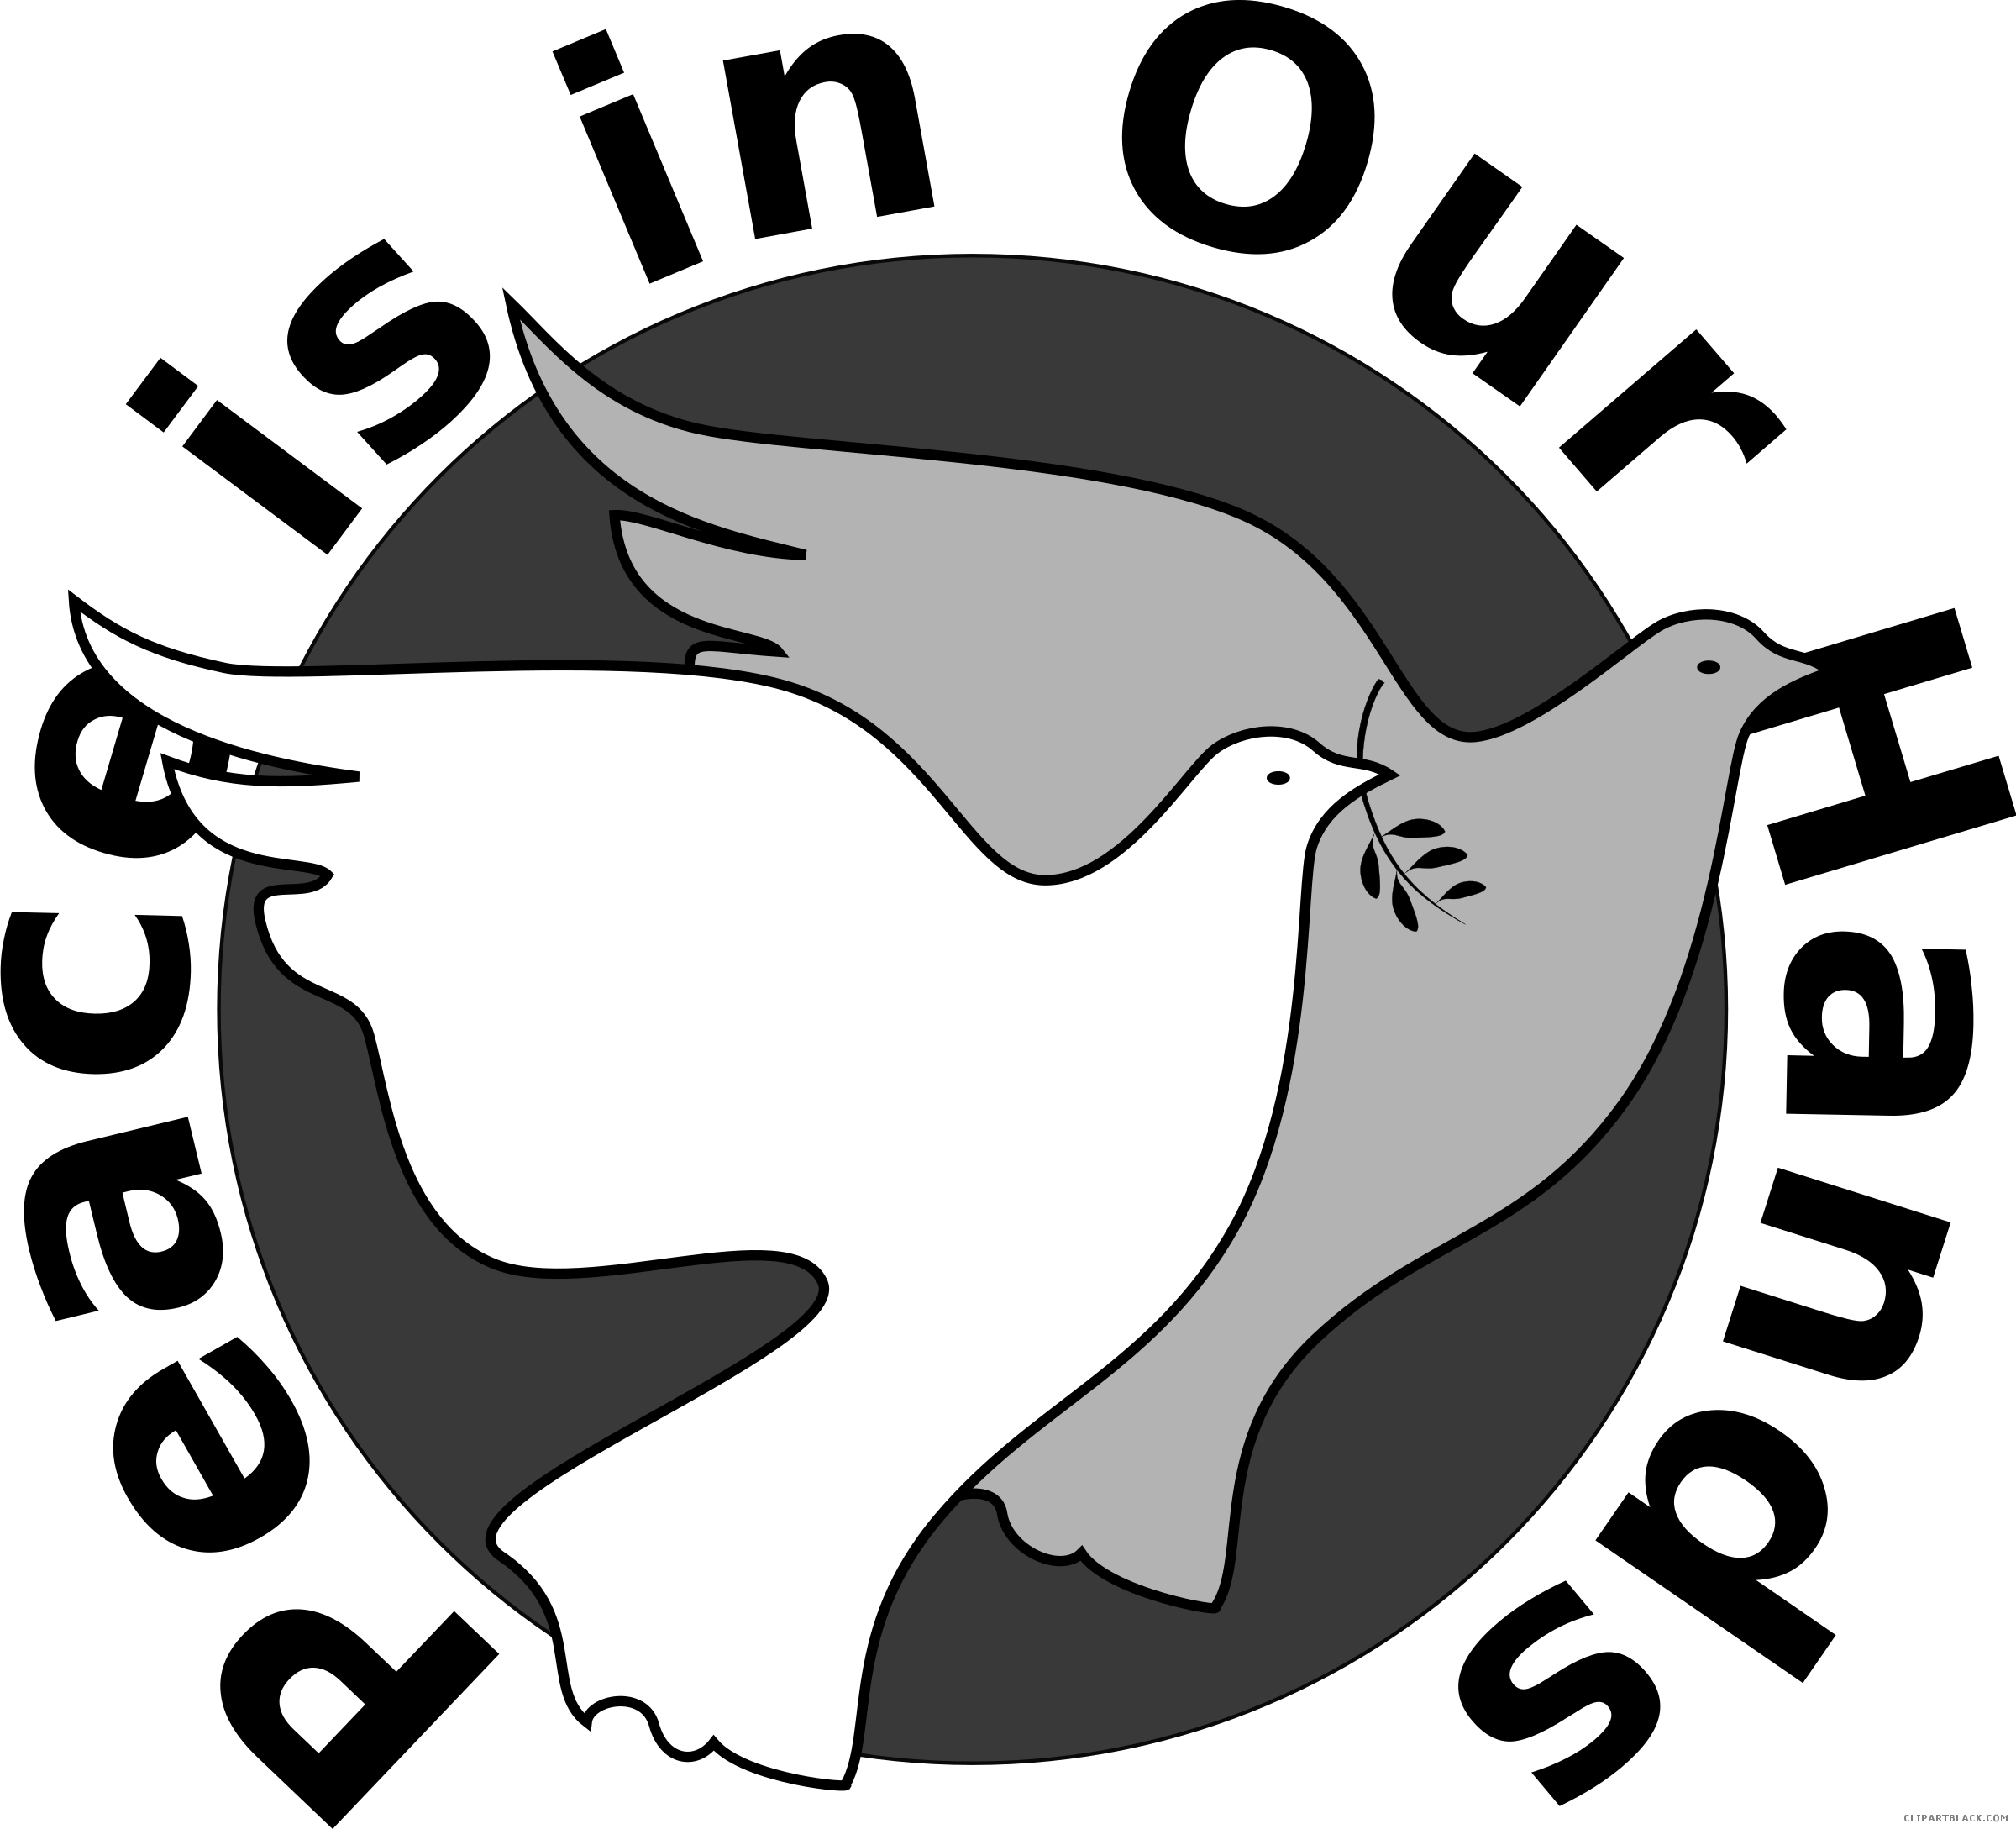 Peace Dove Animal Free Black White Clipart Images Clipartblack - Peace Is In Our Hands (2400x2177)